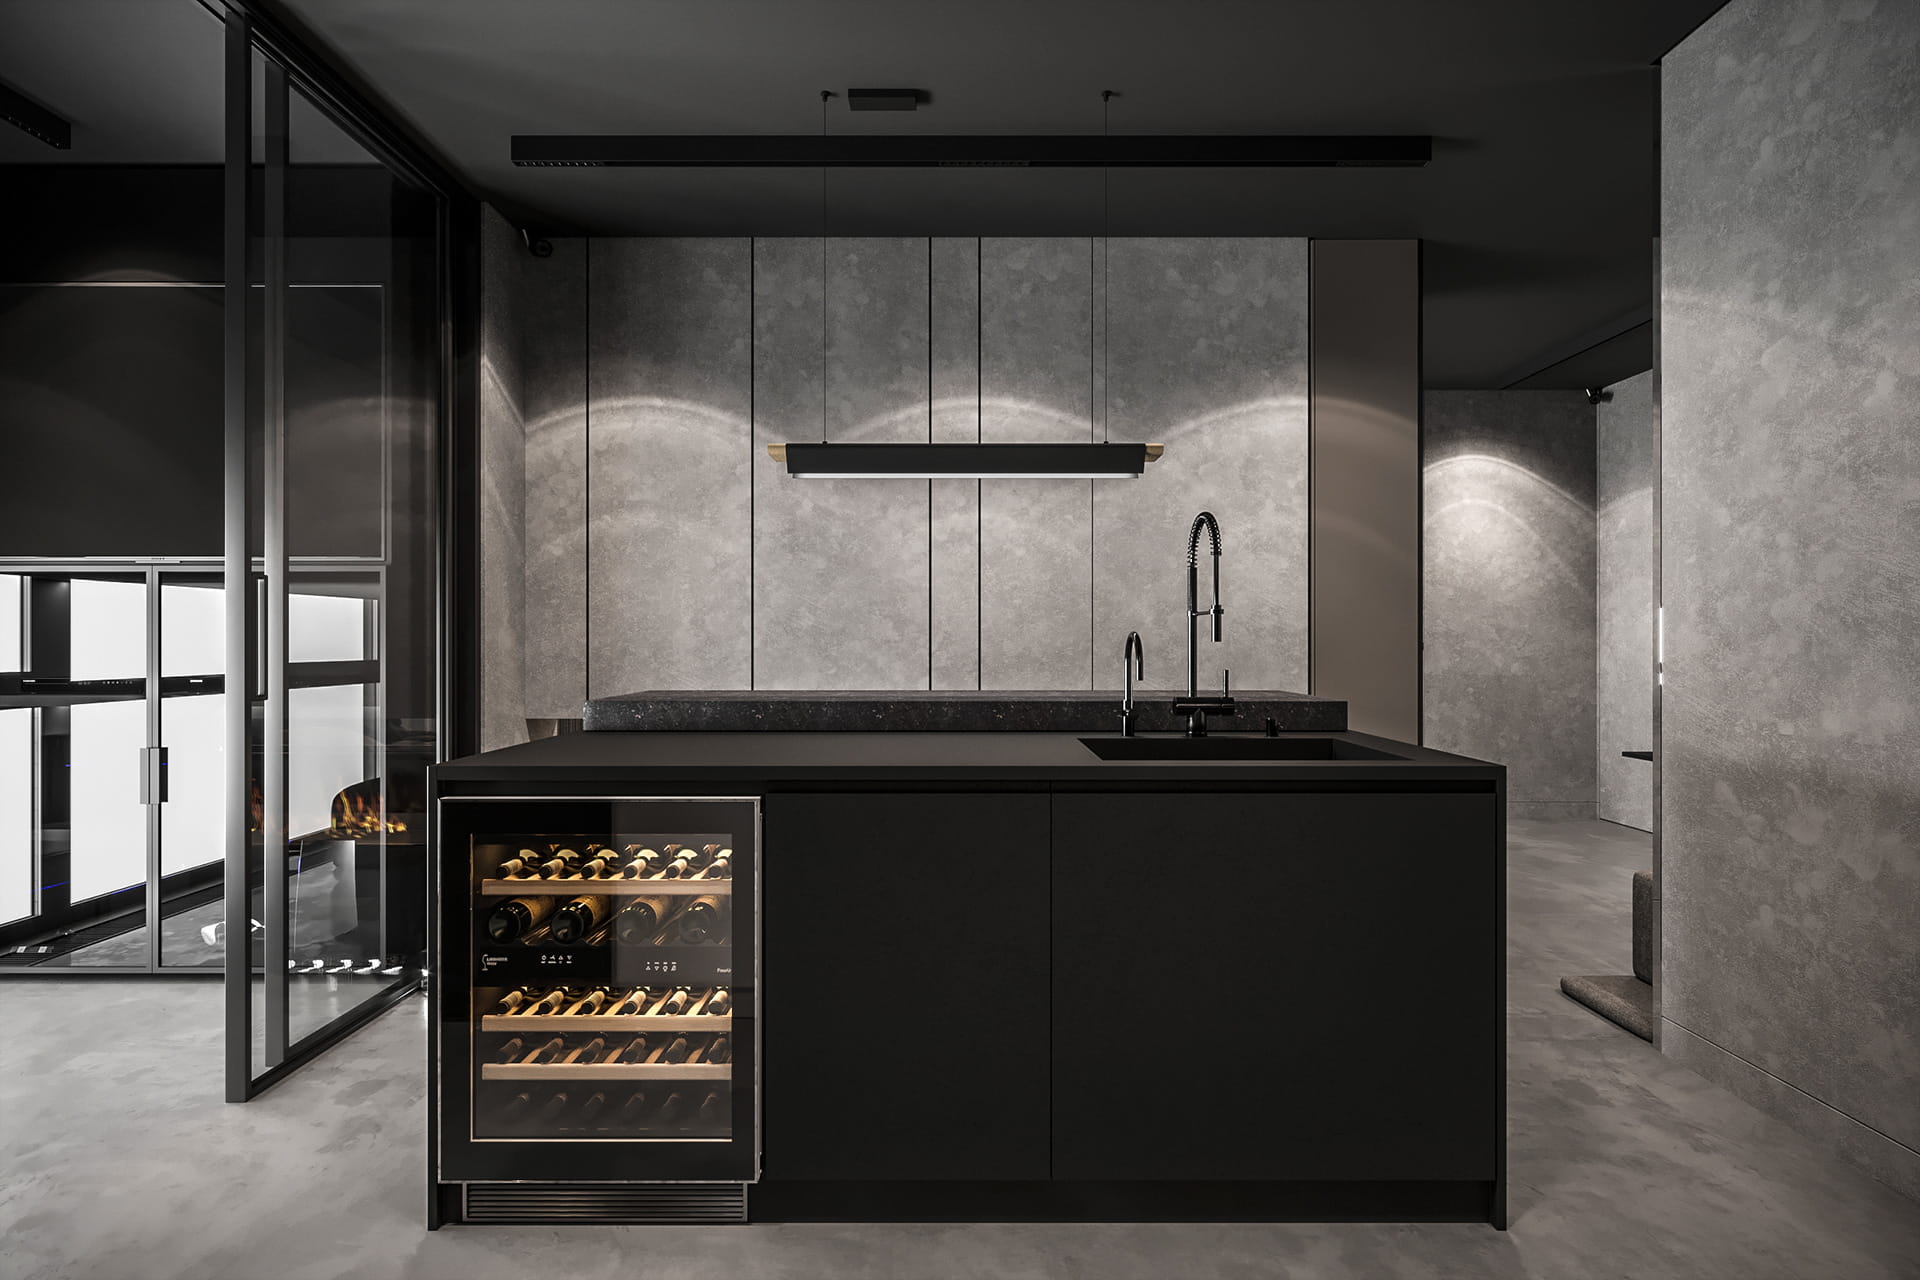 open plan living room with cooking space and countertop with monochromatic touch, built-in glass cabinets and a sink, matt black countertop and matt grey walls, task lighting above the countertop, light installed for cabinets